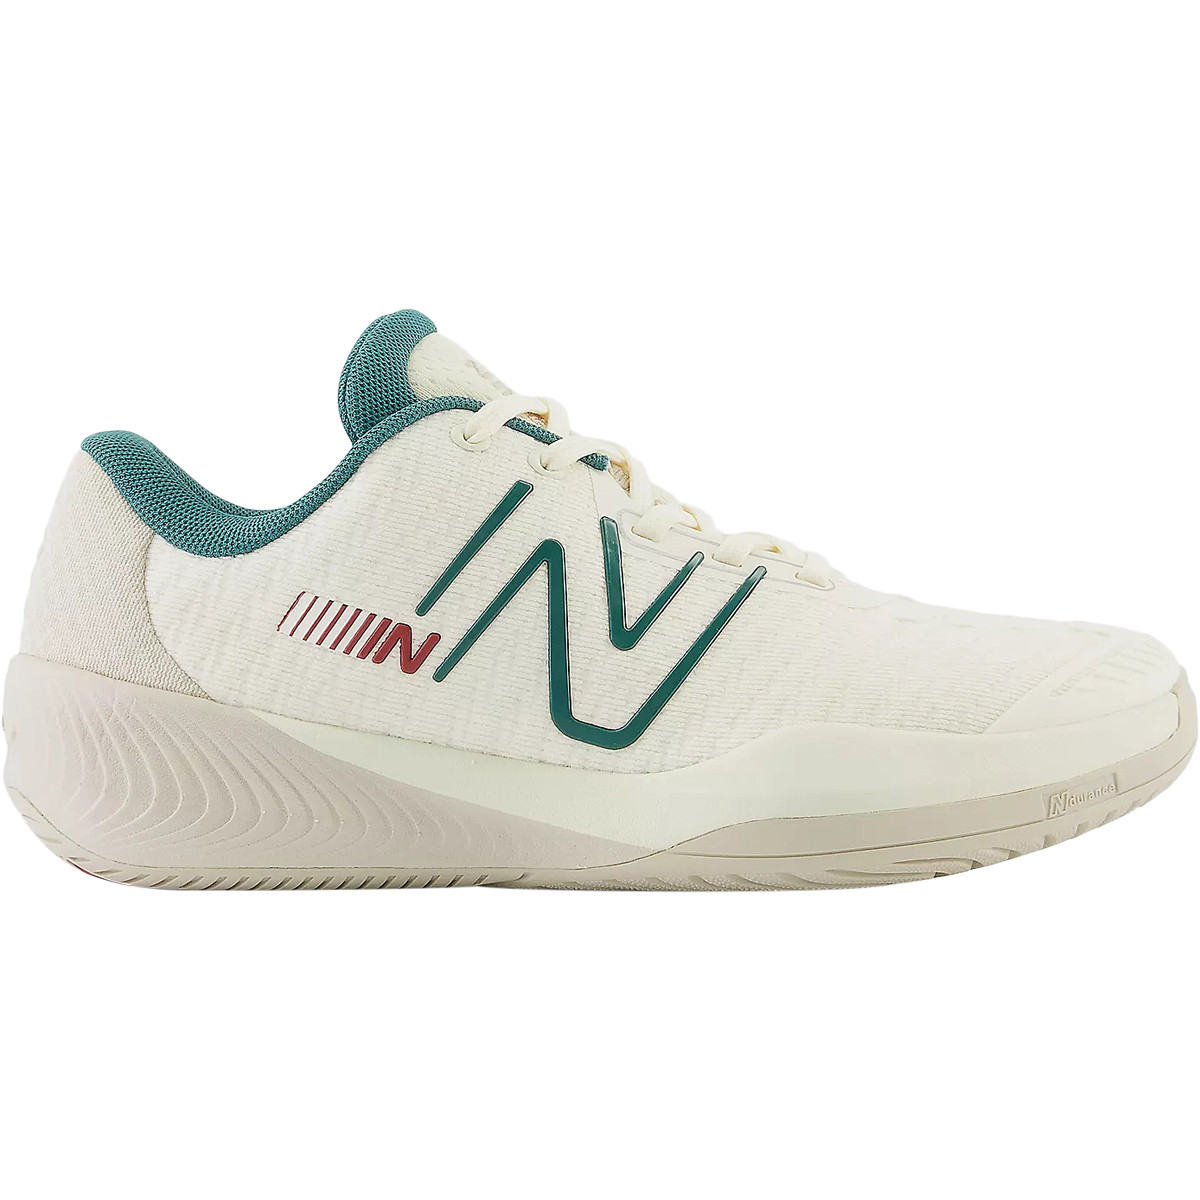 CHAUSSURES NEW BALANCE COCO CG1 TOUTES SURFACES - NEW BALANCE